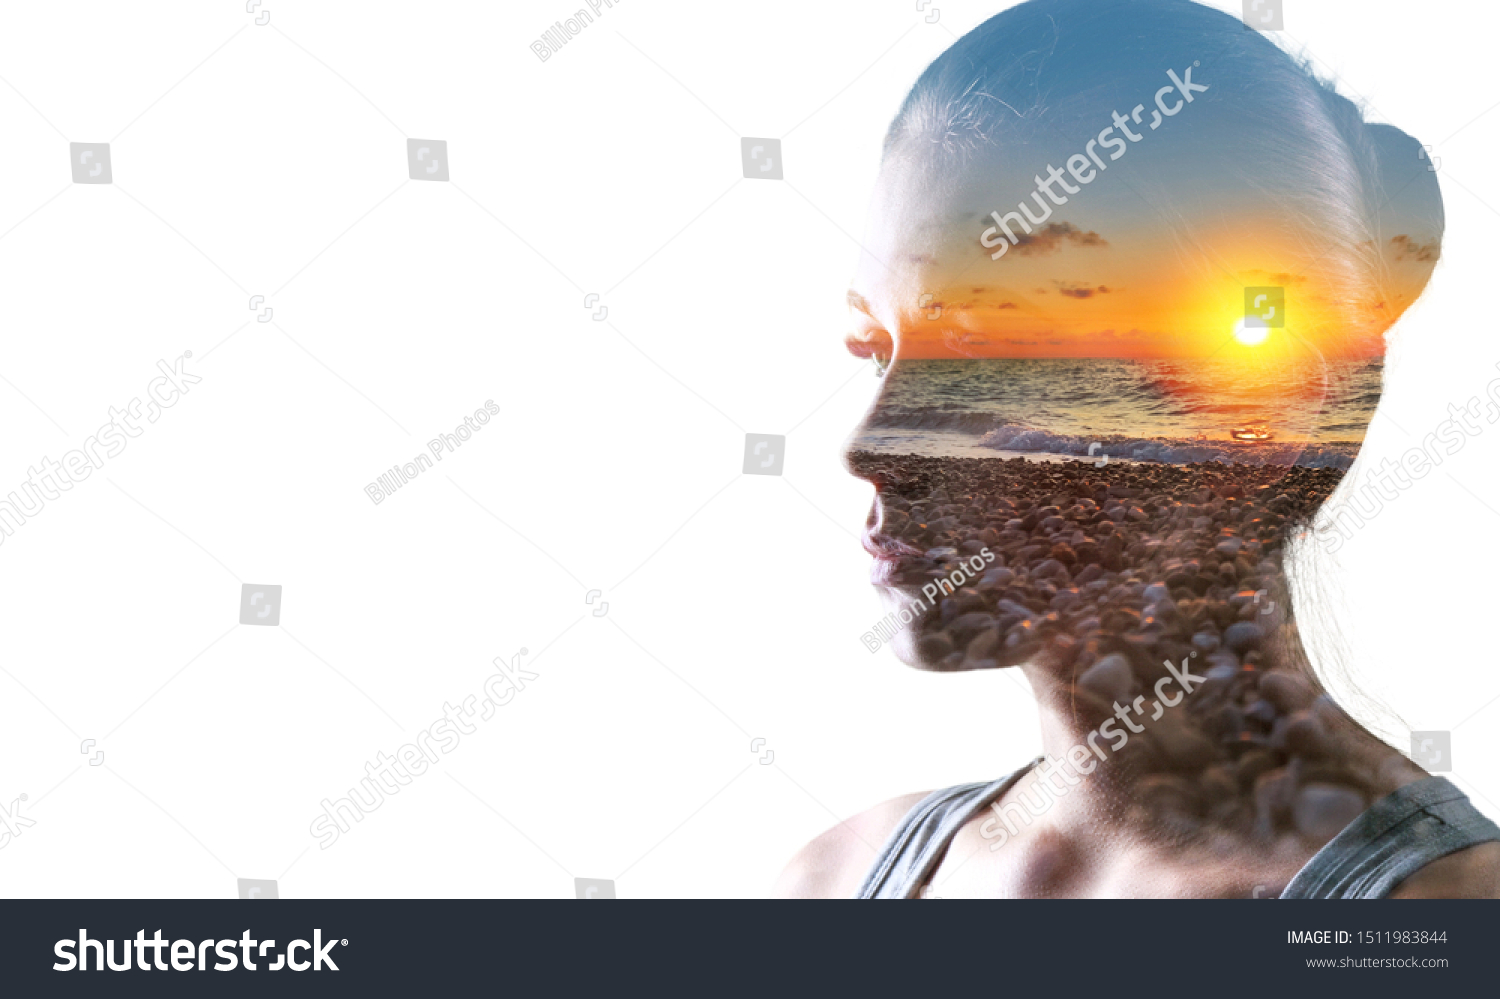 Psychoanalysis and meditation, concept. Profile of a young woman and sunset over the ocean, calm and mental health. Image with double exposure effect. The subconscious and how the brain works #1511983844